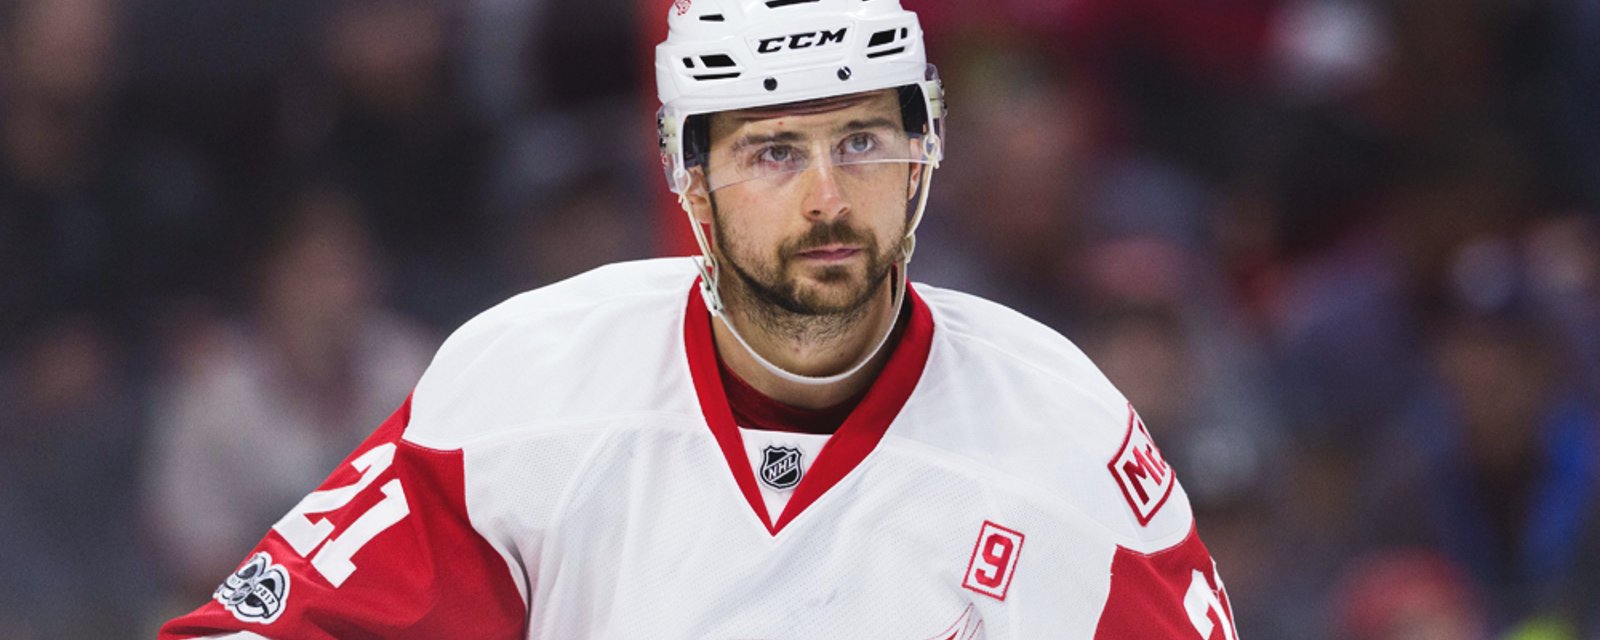 Report: Tatar publicly comments his relationship with Holland​ following arbitration.